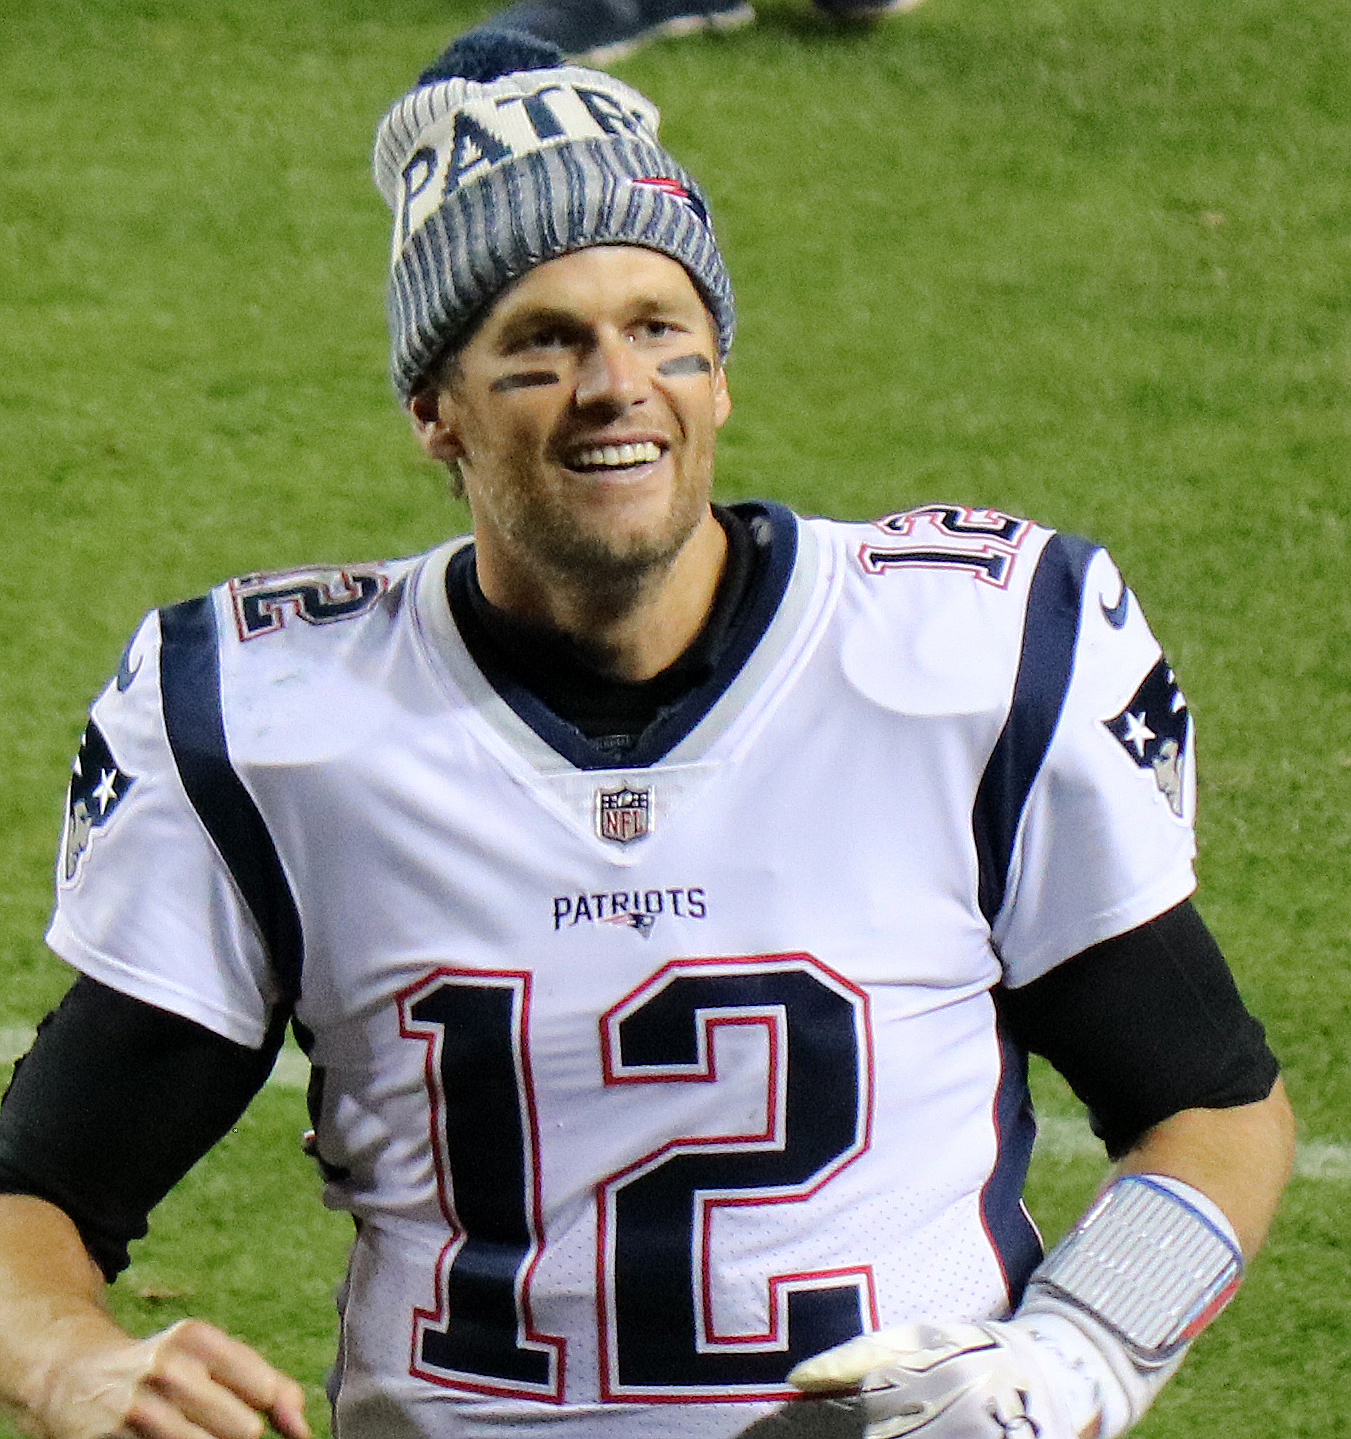 Wikimedia/Jeffrey Beall. Tom Brady, seen here in 2017 when he was with the New England Patriots, won't need his toque in warm and sunny Tampa.